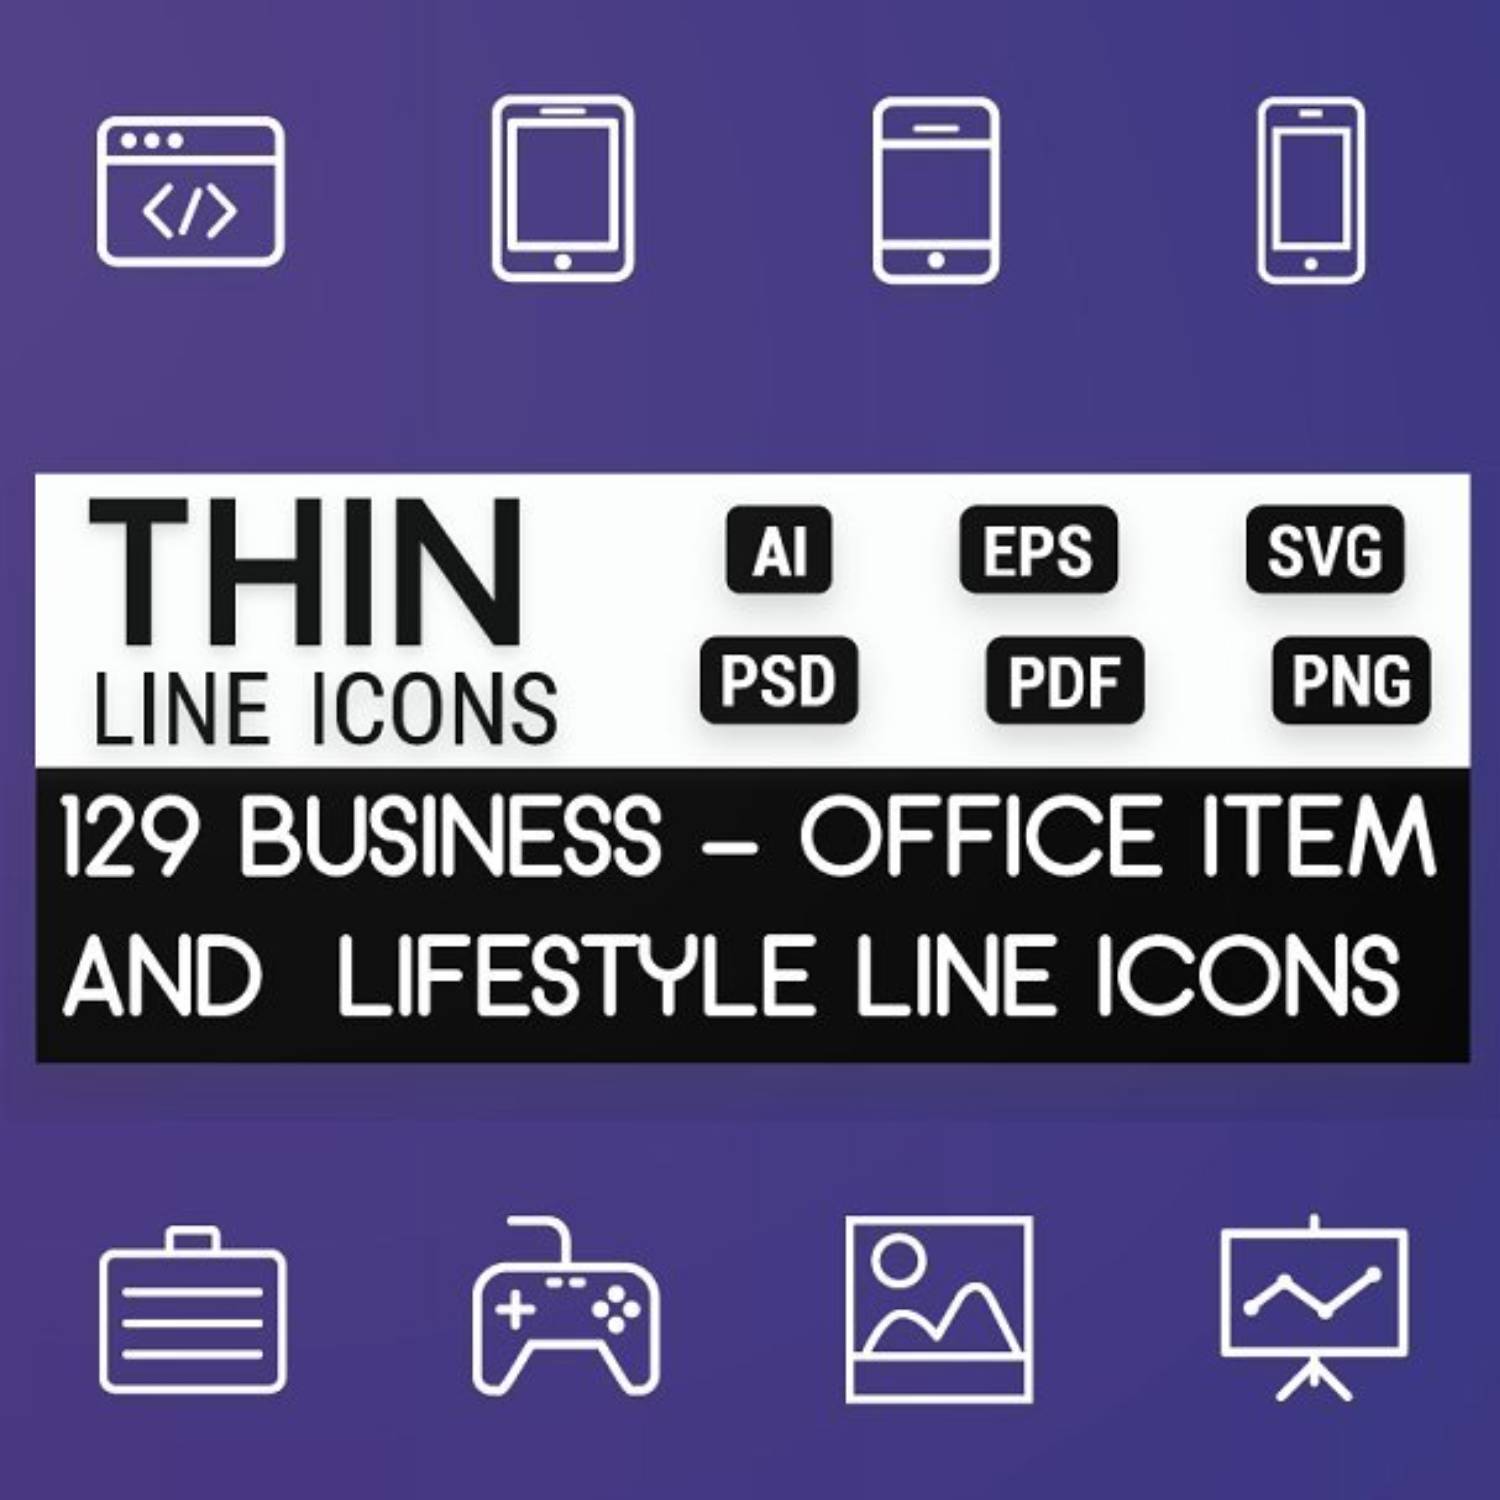 Business - Lifestyle & Office Icons Main Cover.